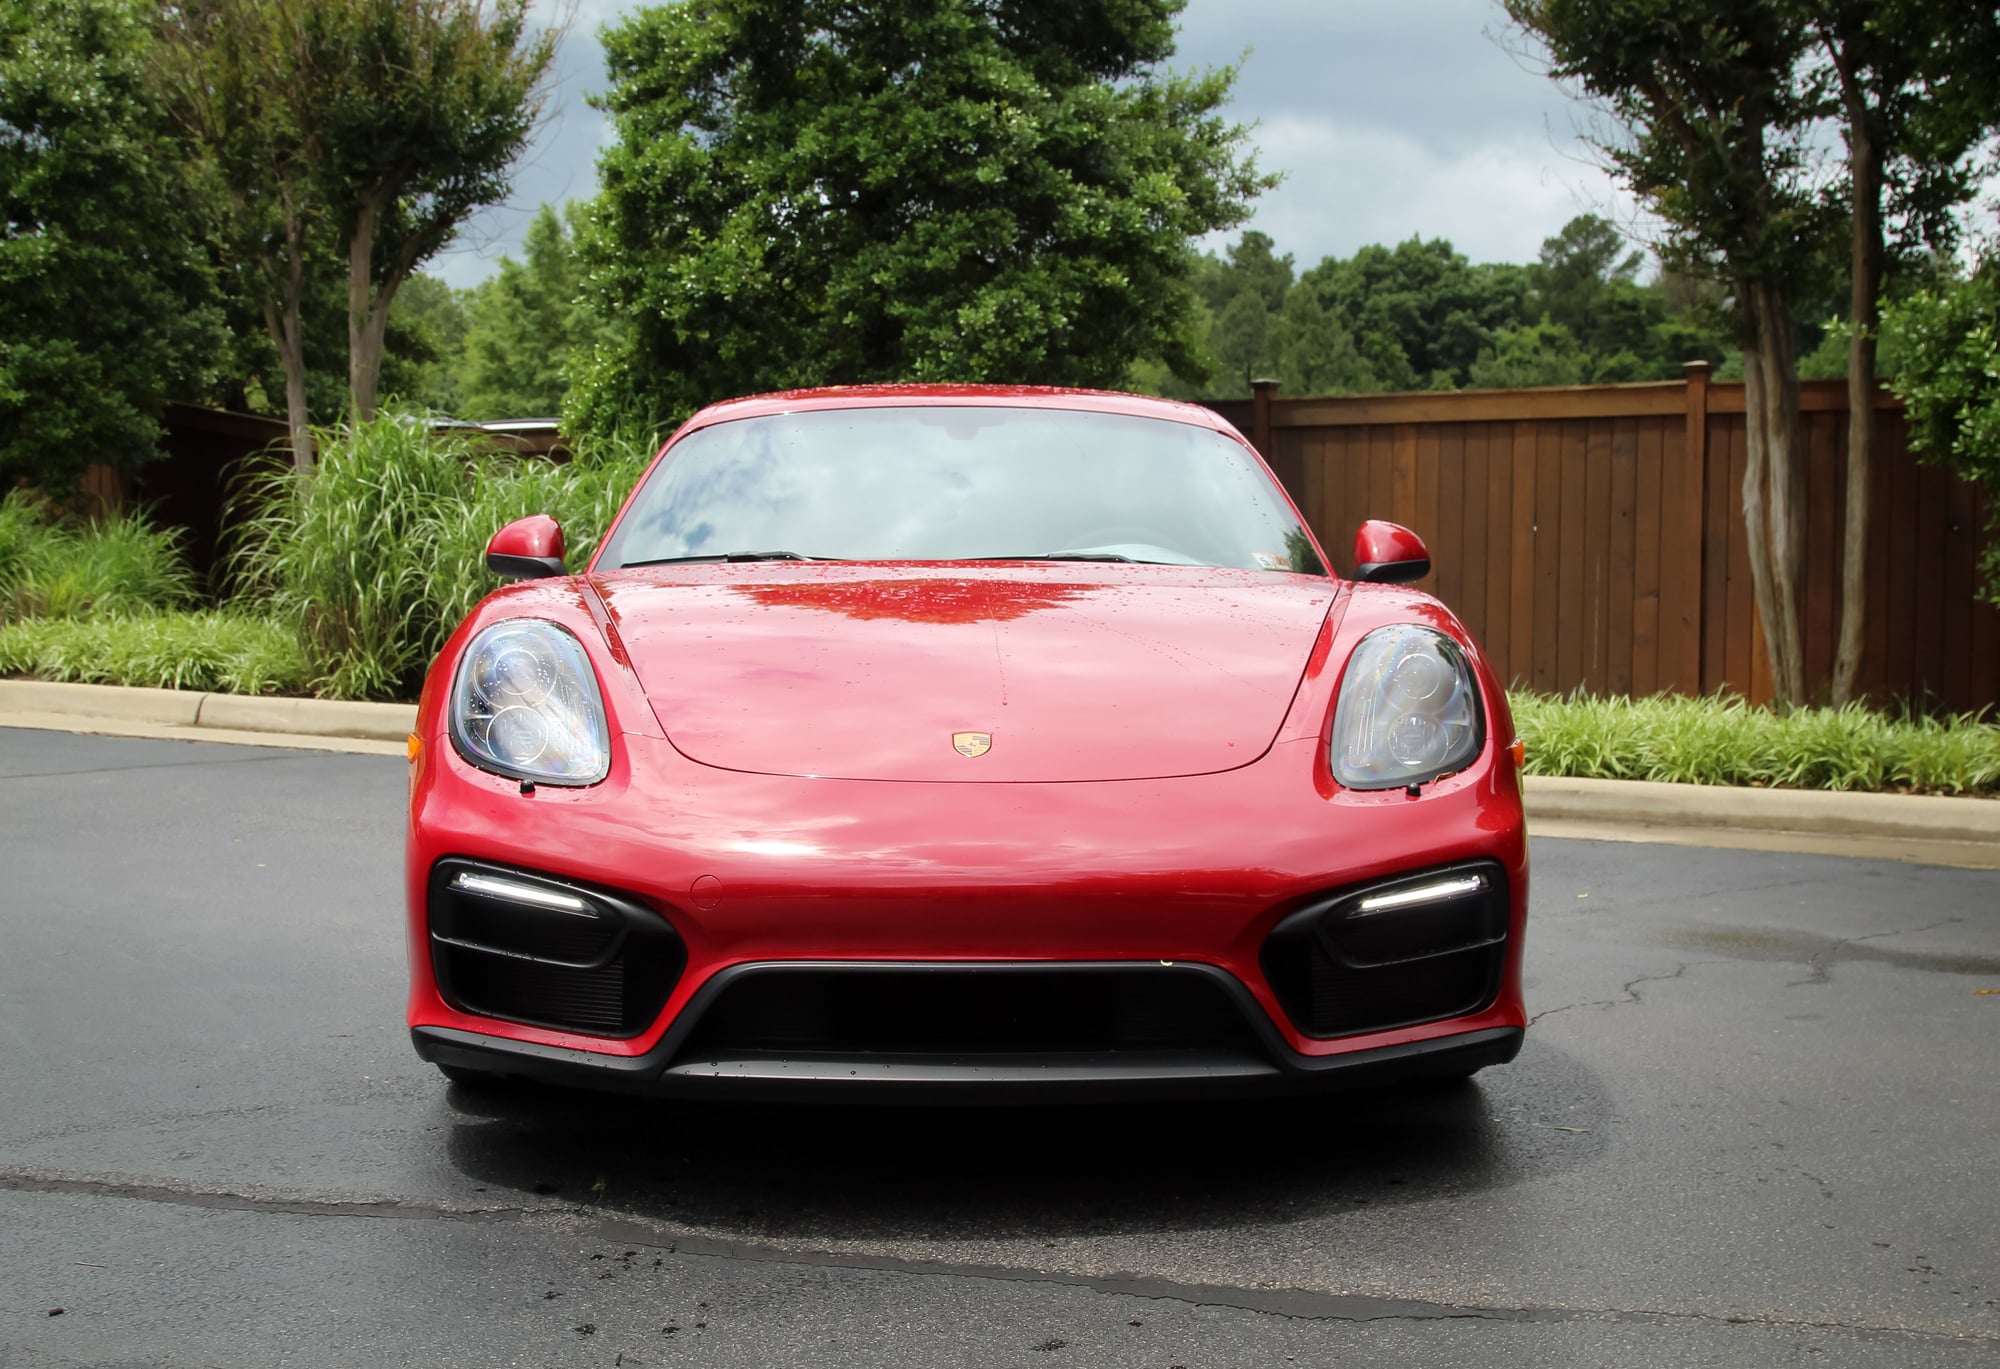 2016 Porsche Cayman - 2016 Porsche Cayman-Manual-Carmine Red-Certified! - Used - VIN WP0AB2A84GK186283 - 11,385 Miles - 6 cyl - 2WD - Manual - Coupe - Red - Richmond, VA 23113, United States